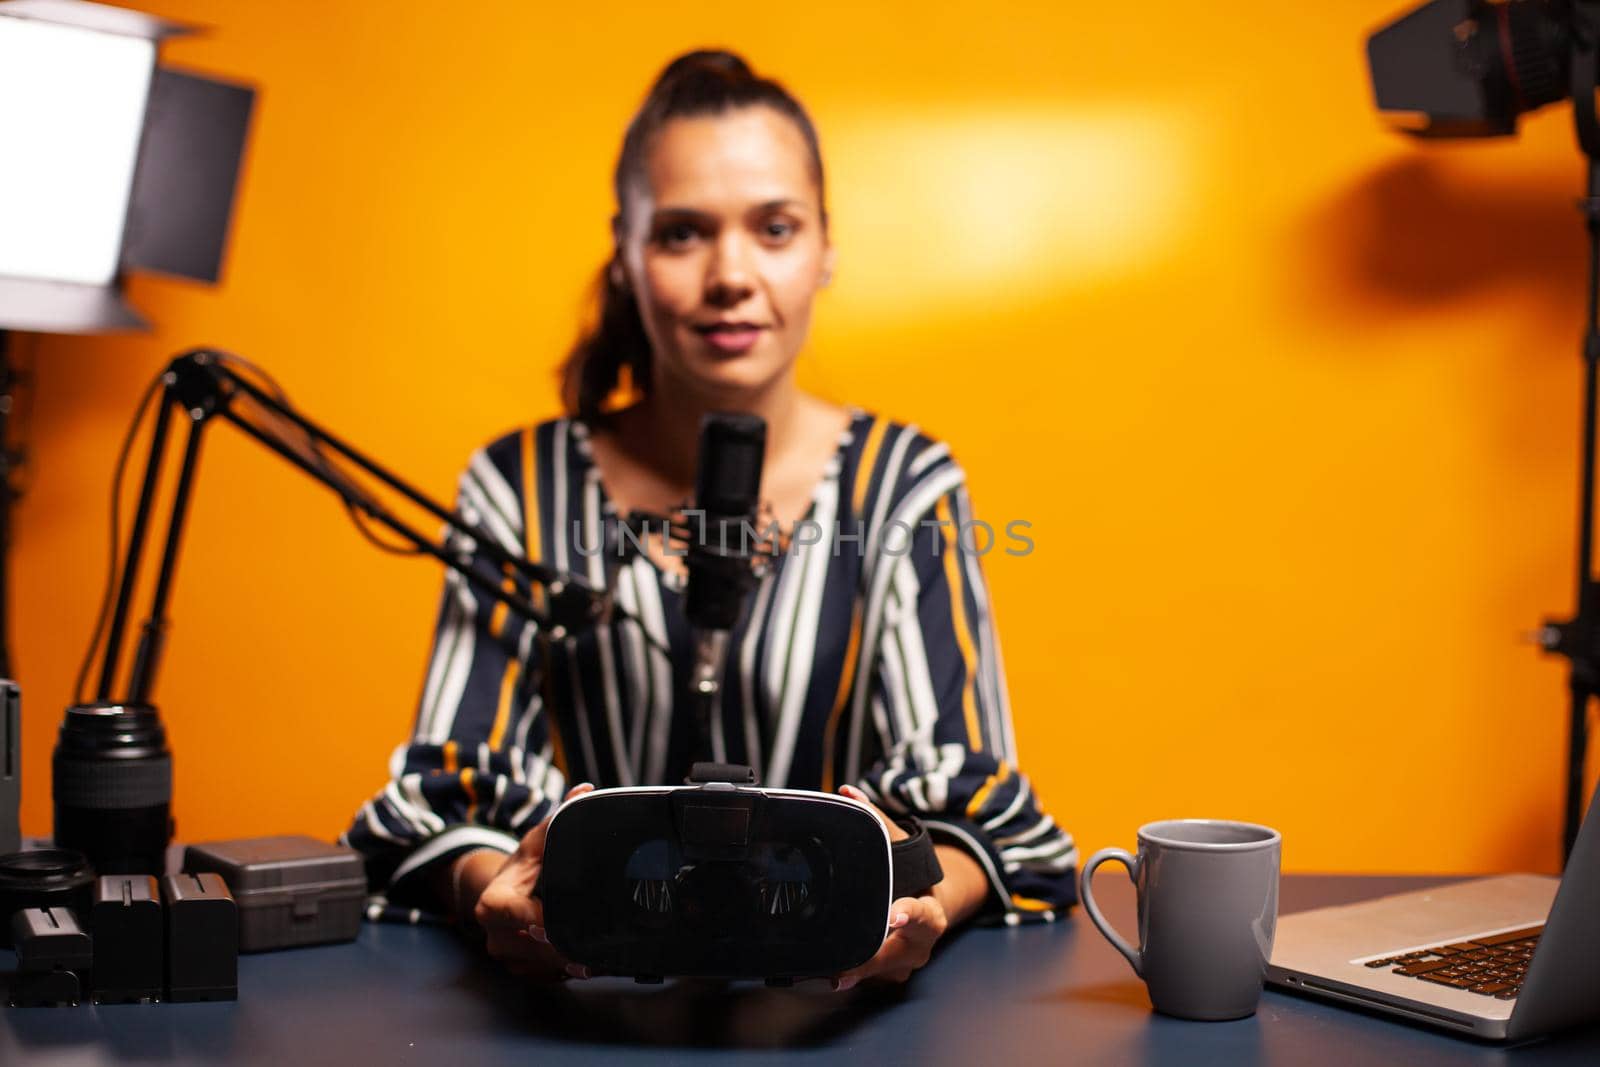 Woman holding headset while recording video blog in home studio. Video blog studio review of weareble technology with stereoscopic cyber reality, electronics gadget experience, gaming industry